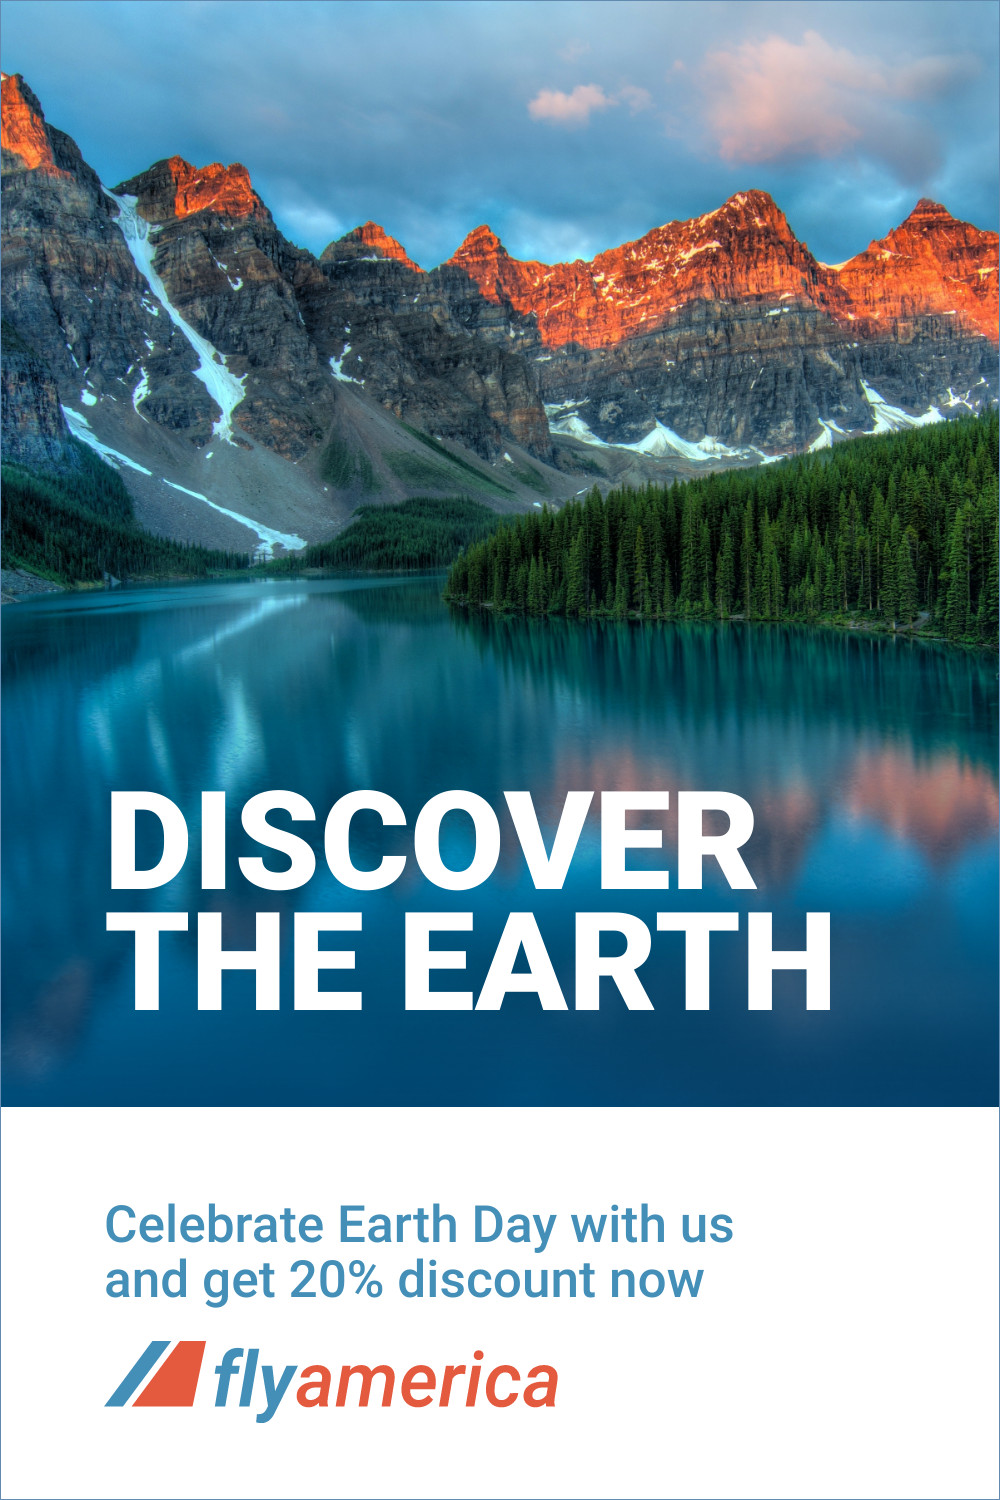 Travel and Discover Earth Day